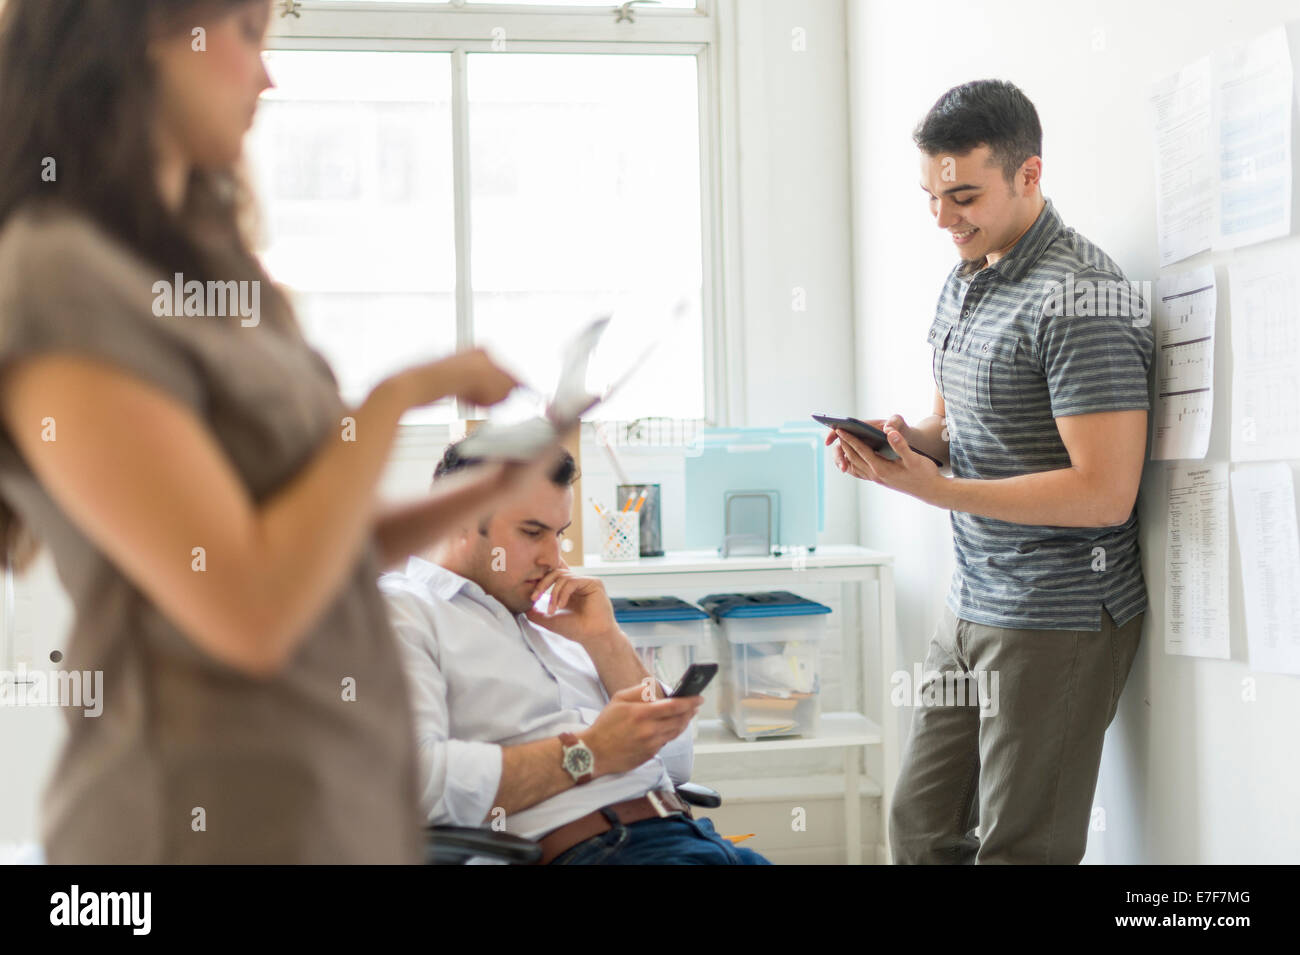 Hispanic business people using technology in office Stock Photo